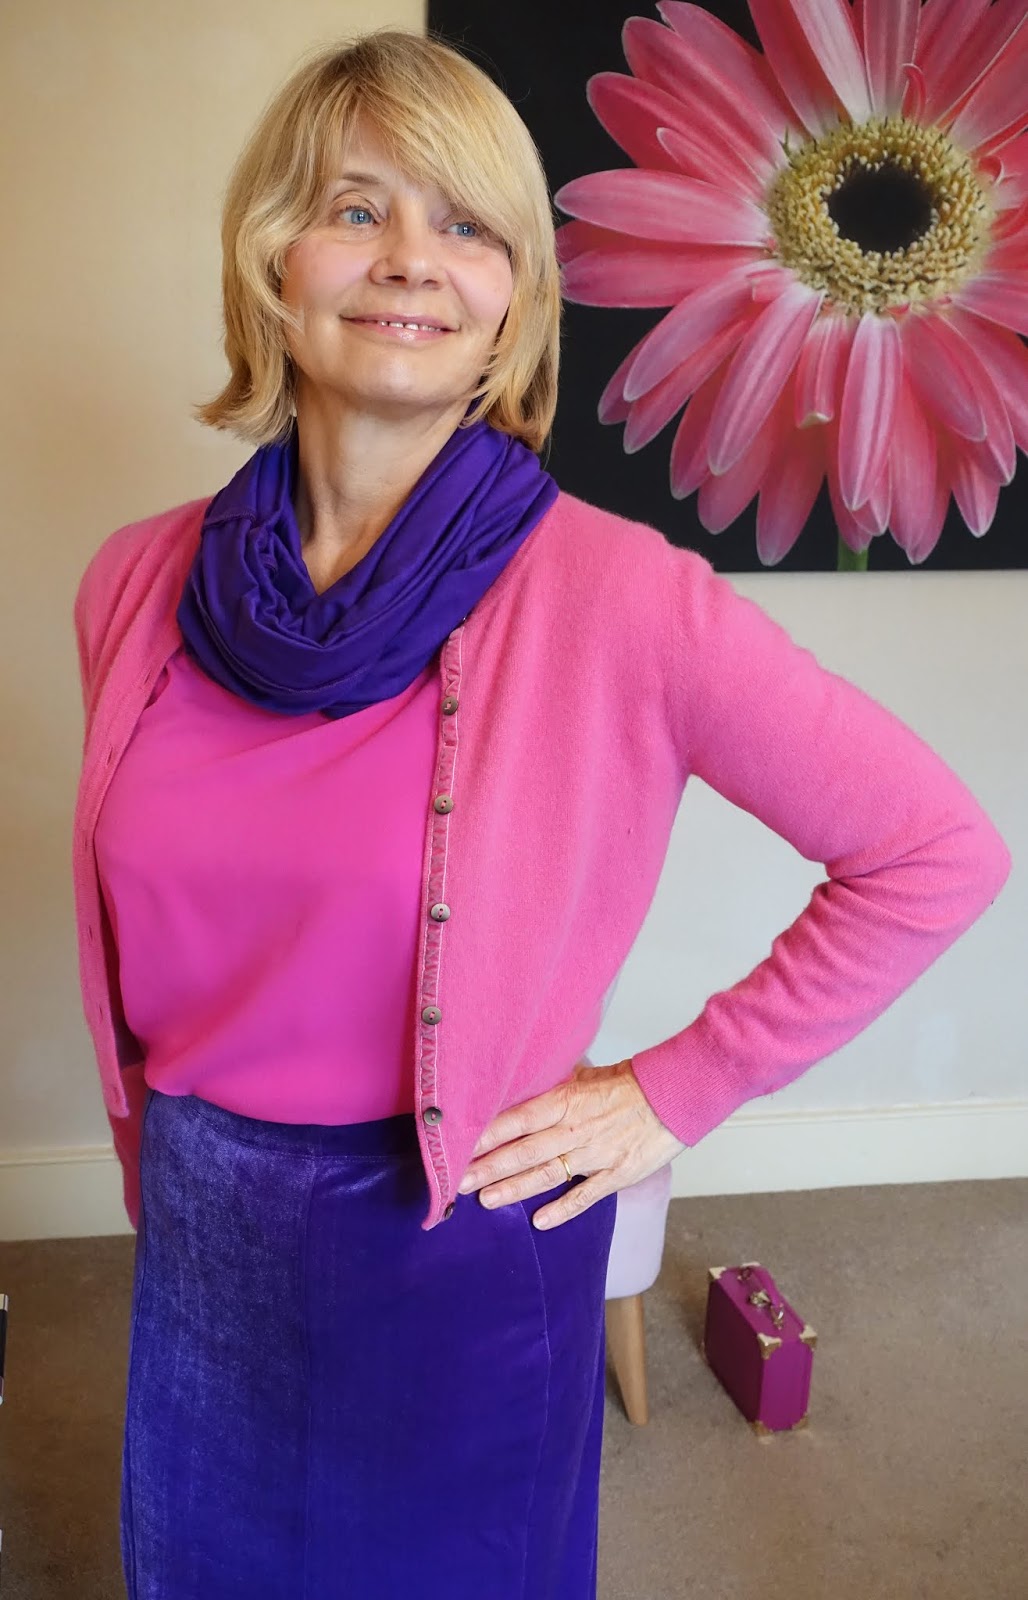 Over 50s blogger Is This Mutton in pink with purple